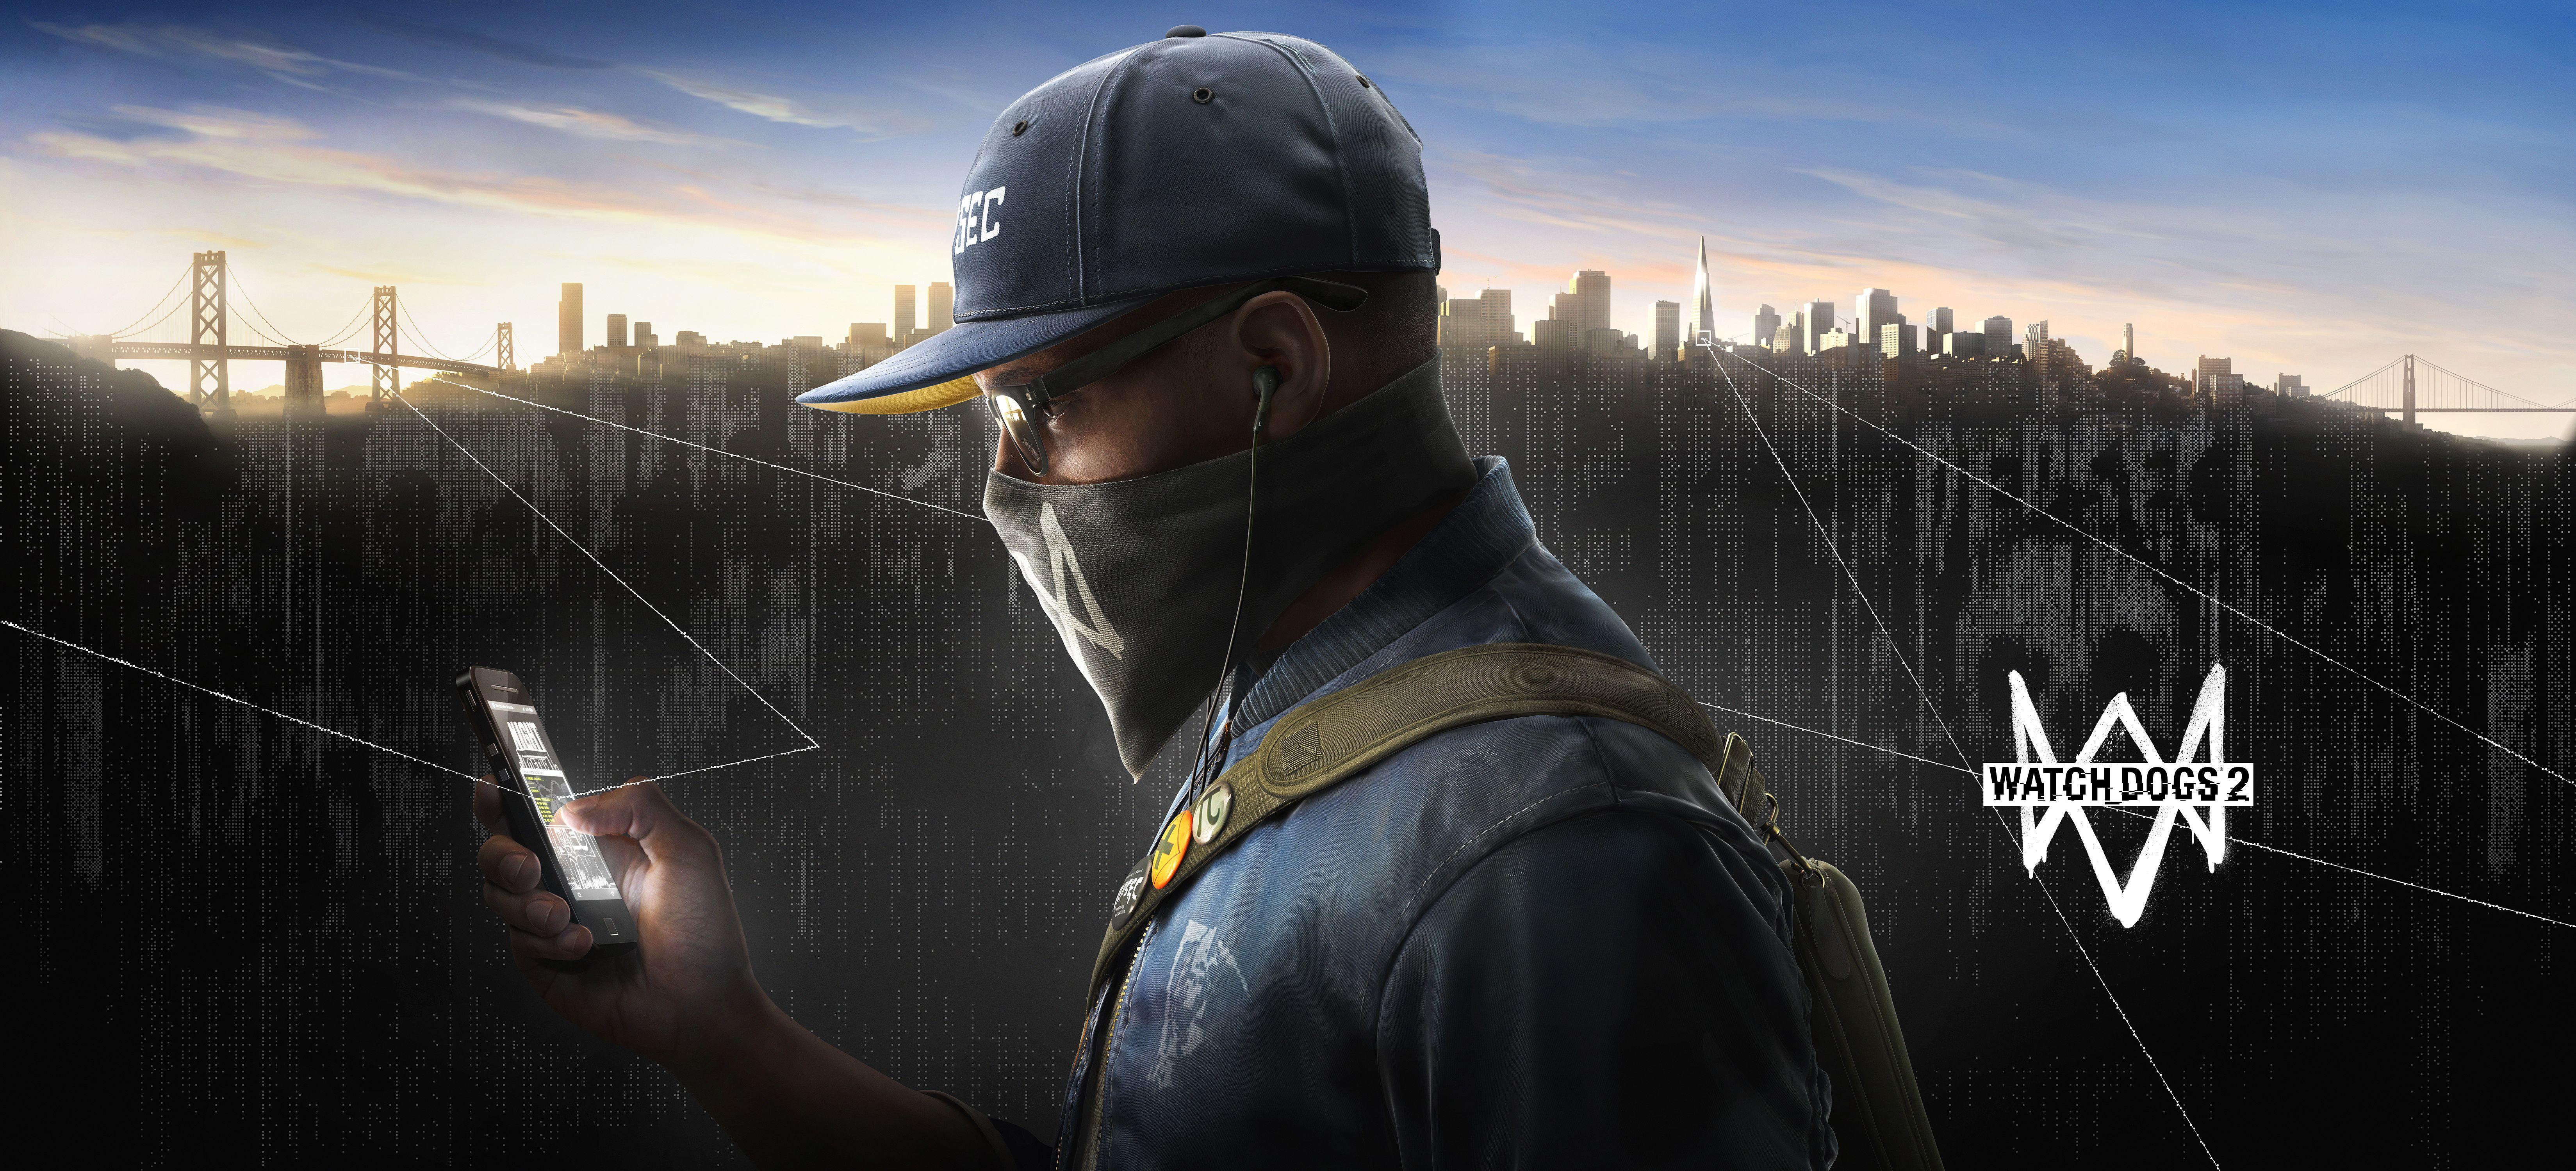 free download watch dogs 2 for pc